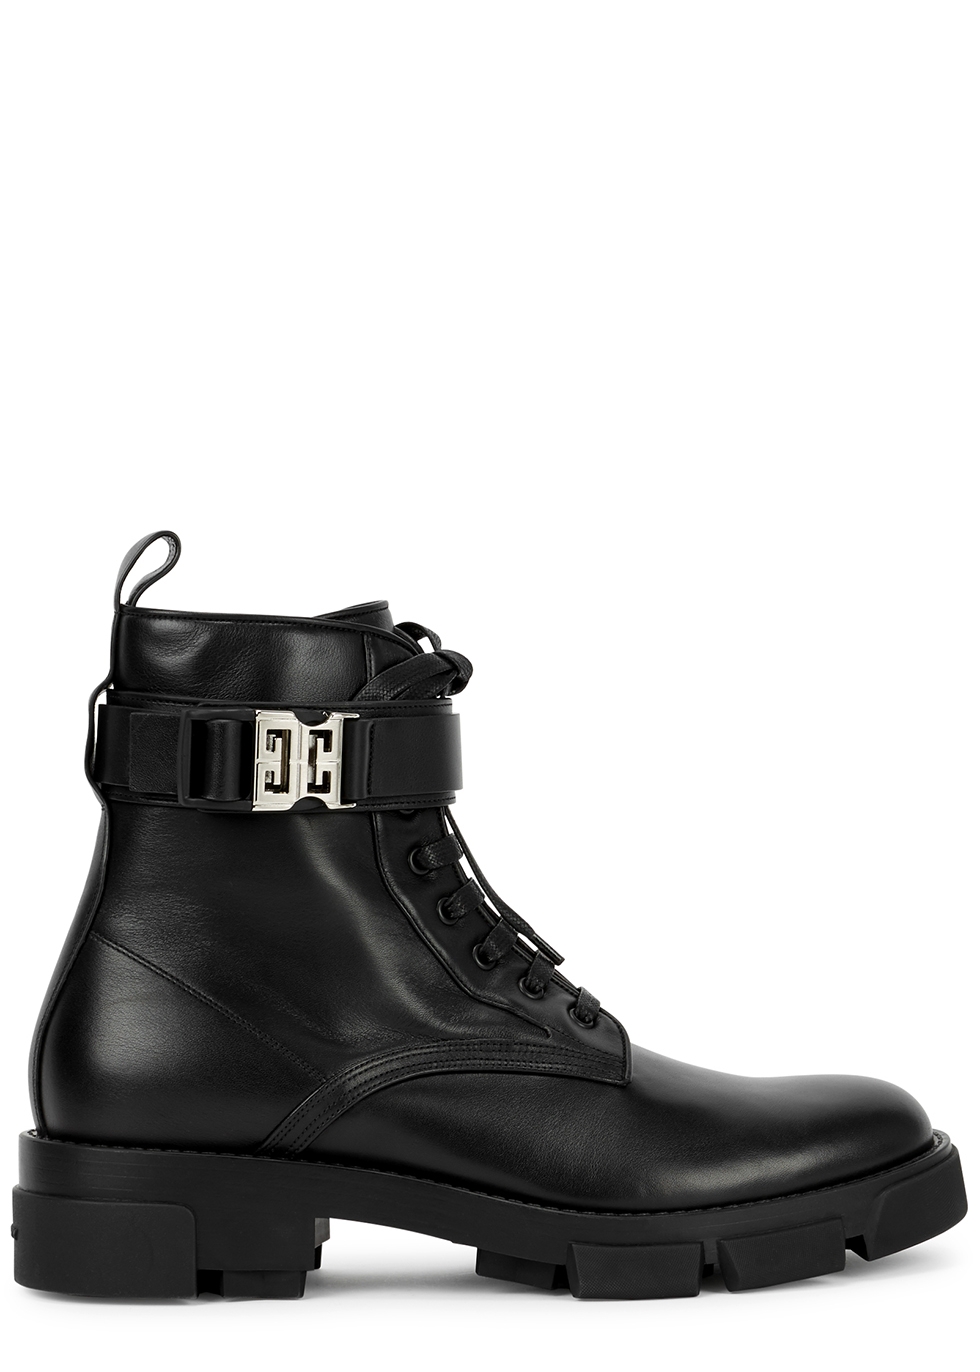 Givenchy Terra black leather combat boots